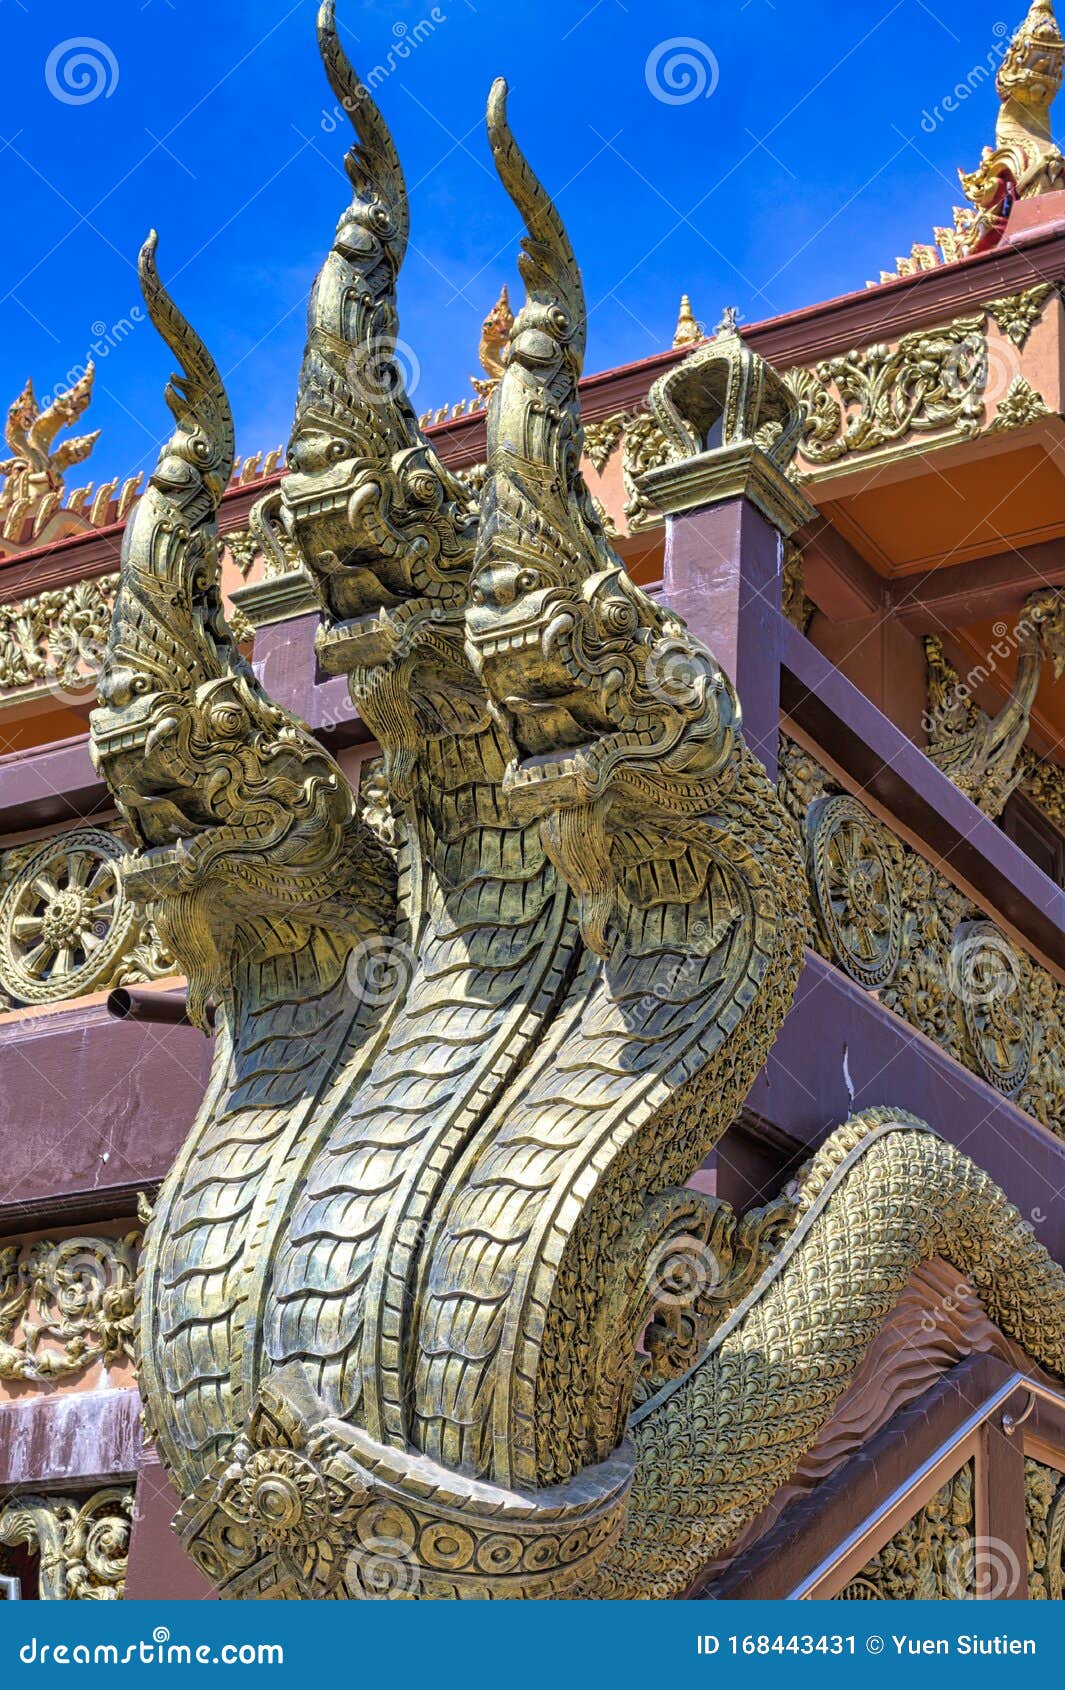 Pathum Thani District Pathum Thani Thailand January 2 Wat Rangsit Temple Is A Beautiful Northern Style Pavilion Editorial Photo Image Of Buddhism Honor